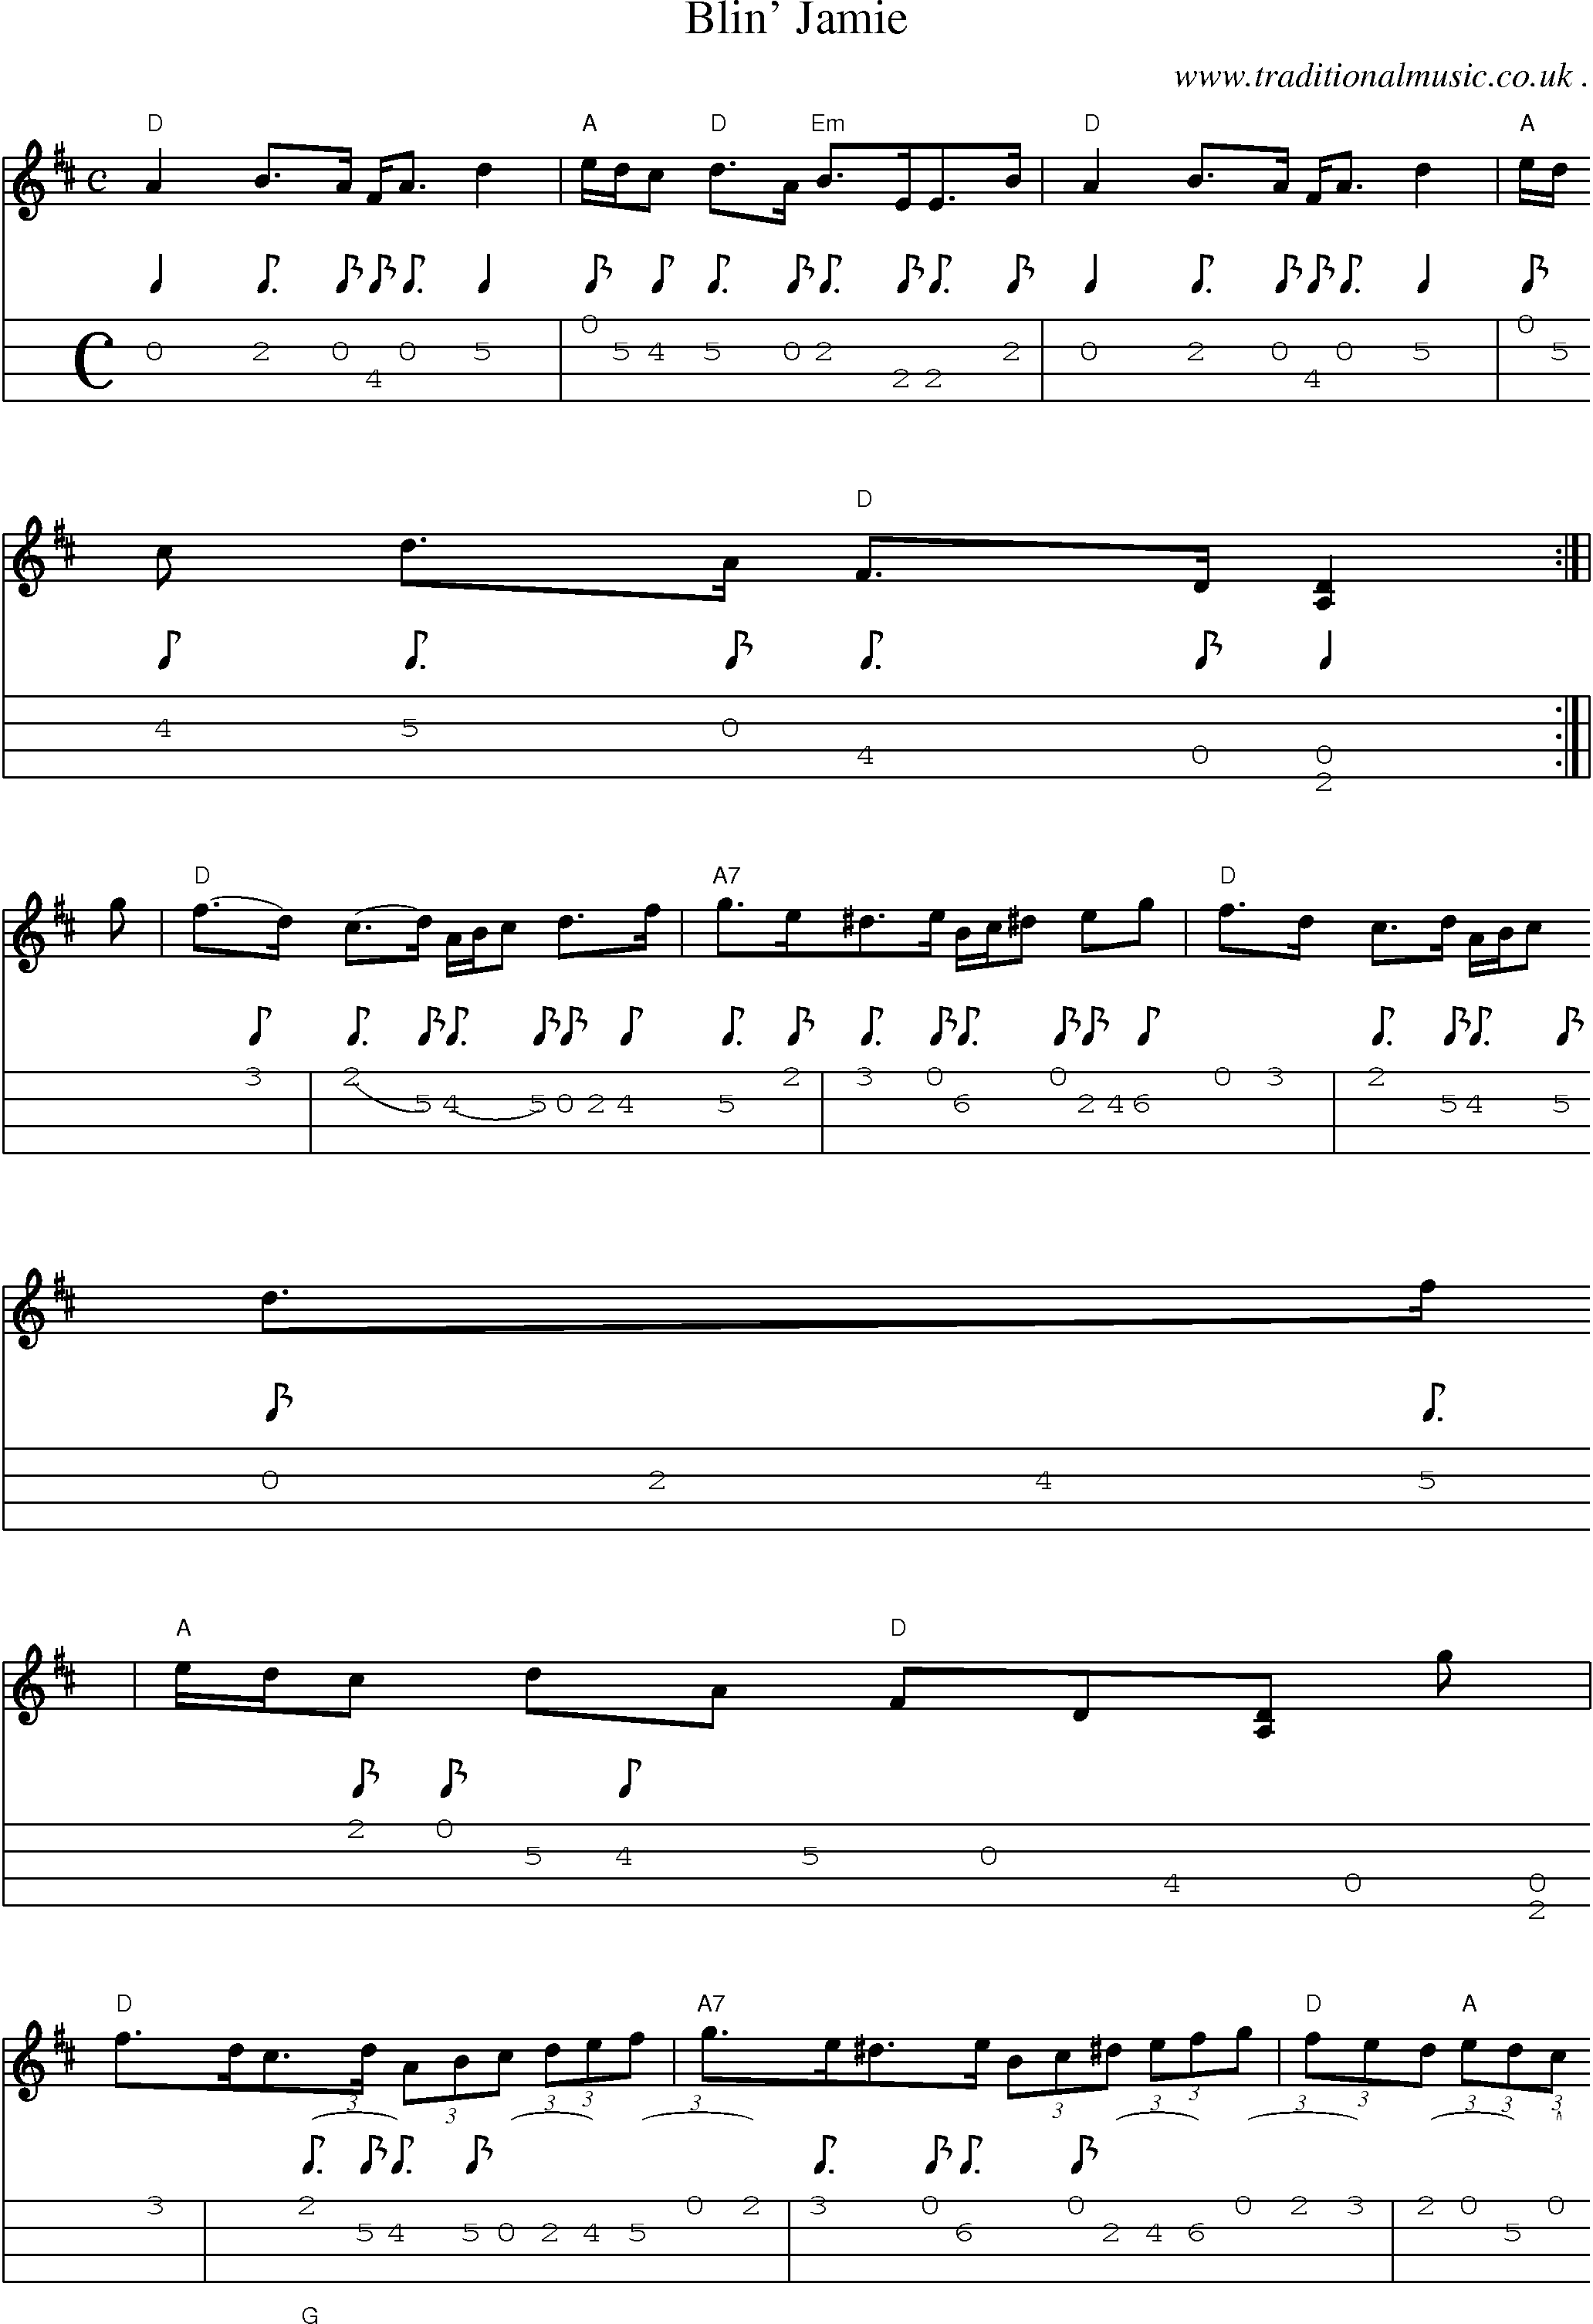 Sheet-music  score, Chords and Mandolin Tabs for Blin Jamie